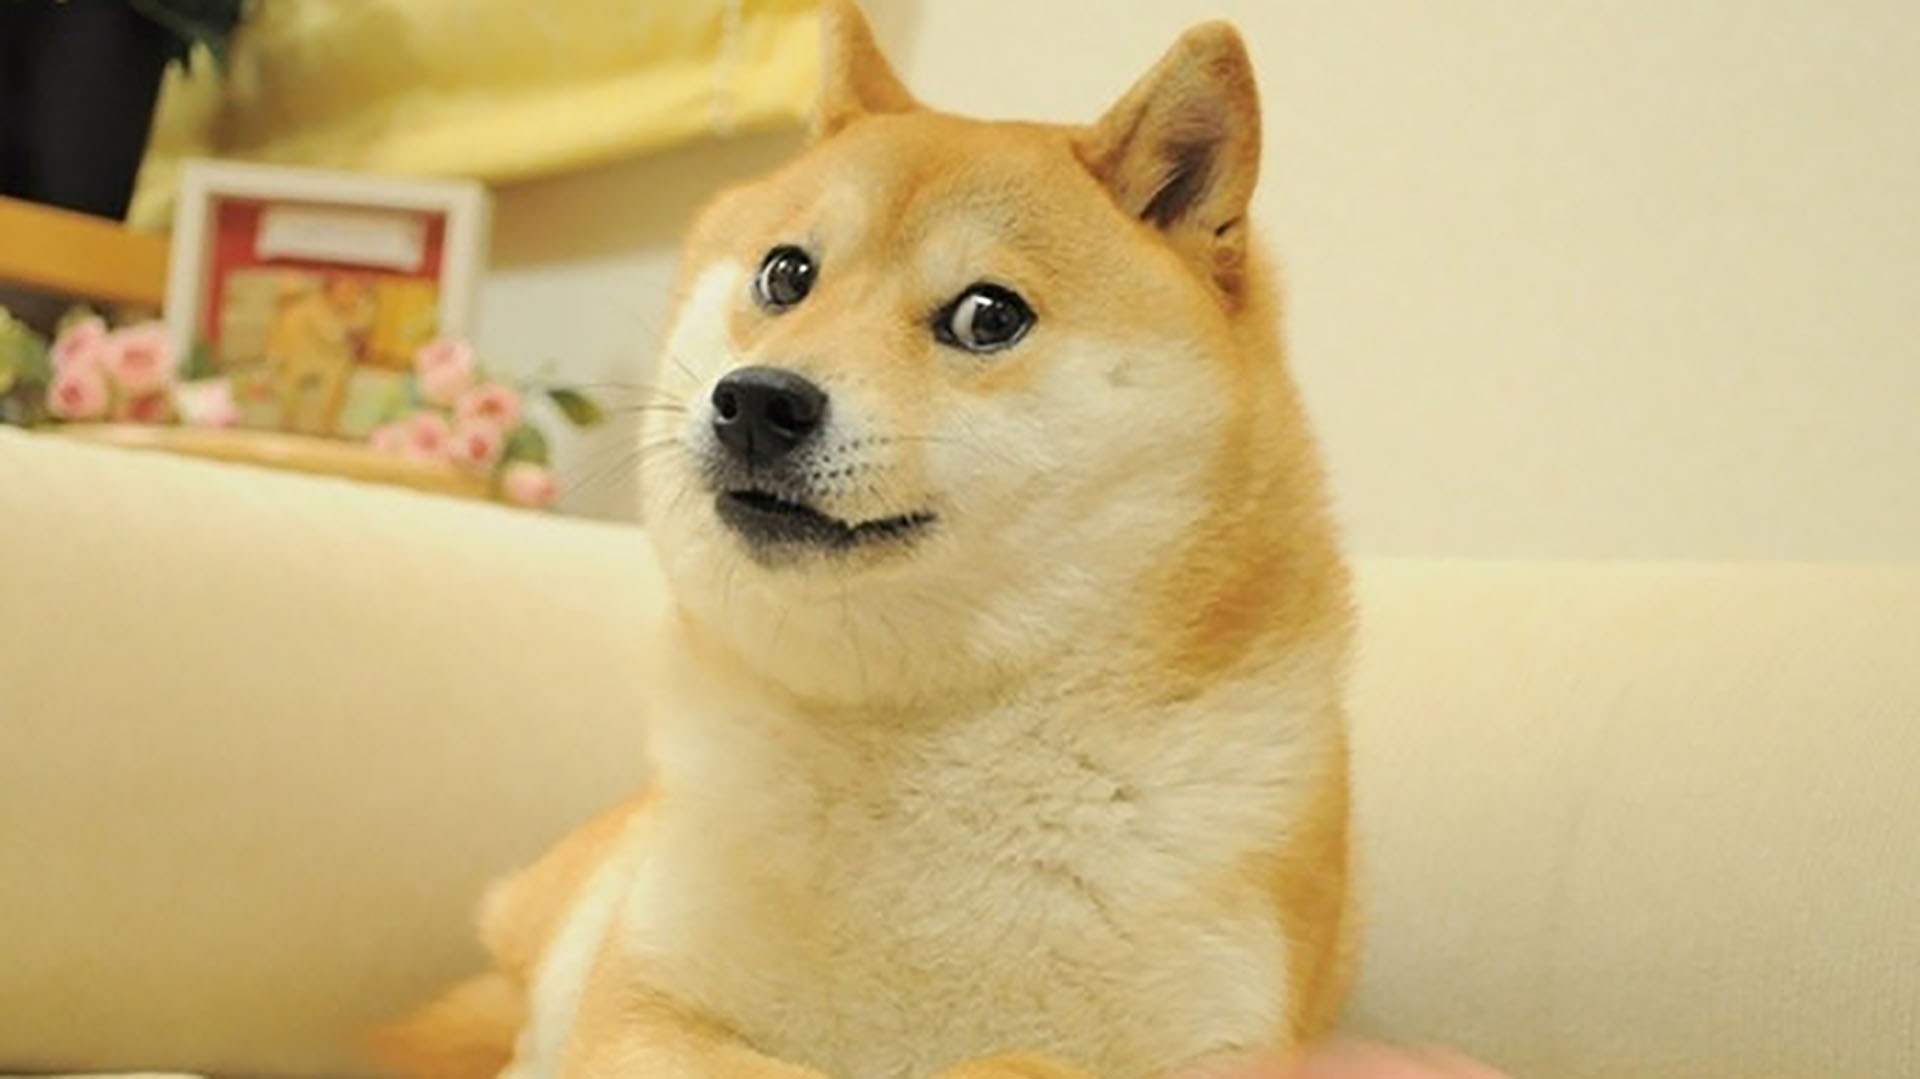 The image of "Doge" the dog went viral in 2014